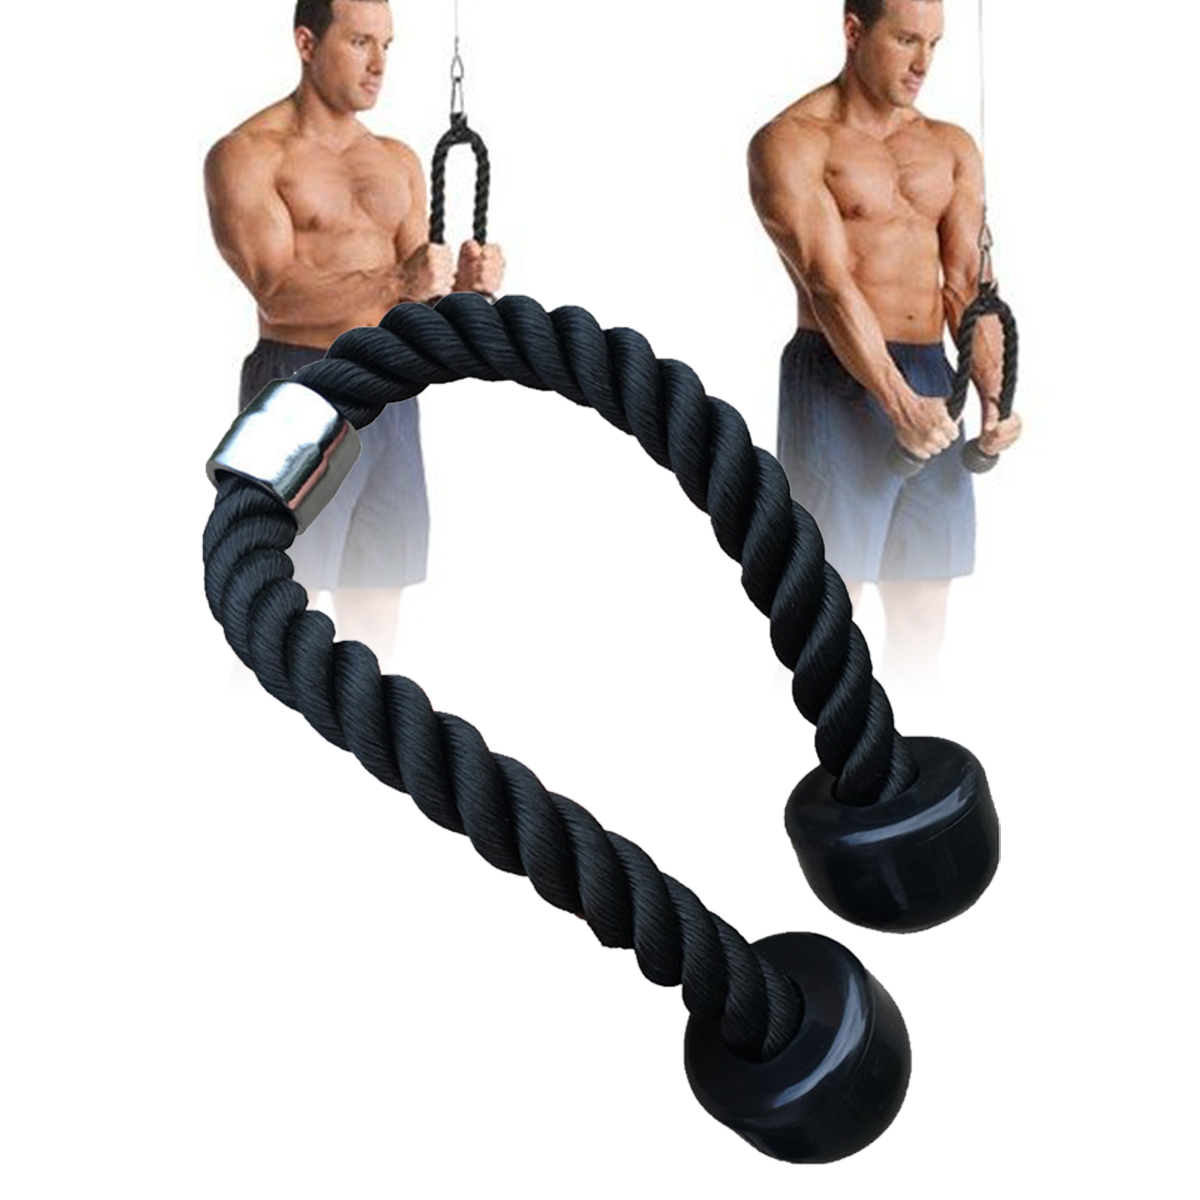 Tricep-Rope-Abdominal-Crunches-Cable-Pull-Down-Laterals-Biceps-Muscle-Training-Fitness-Body-Building-1830042-1